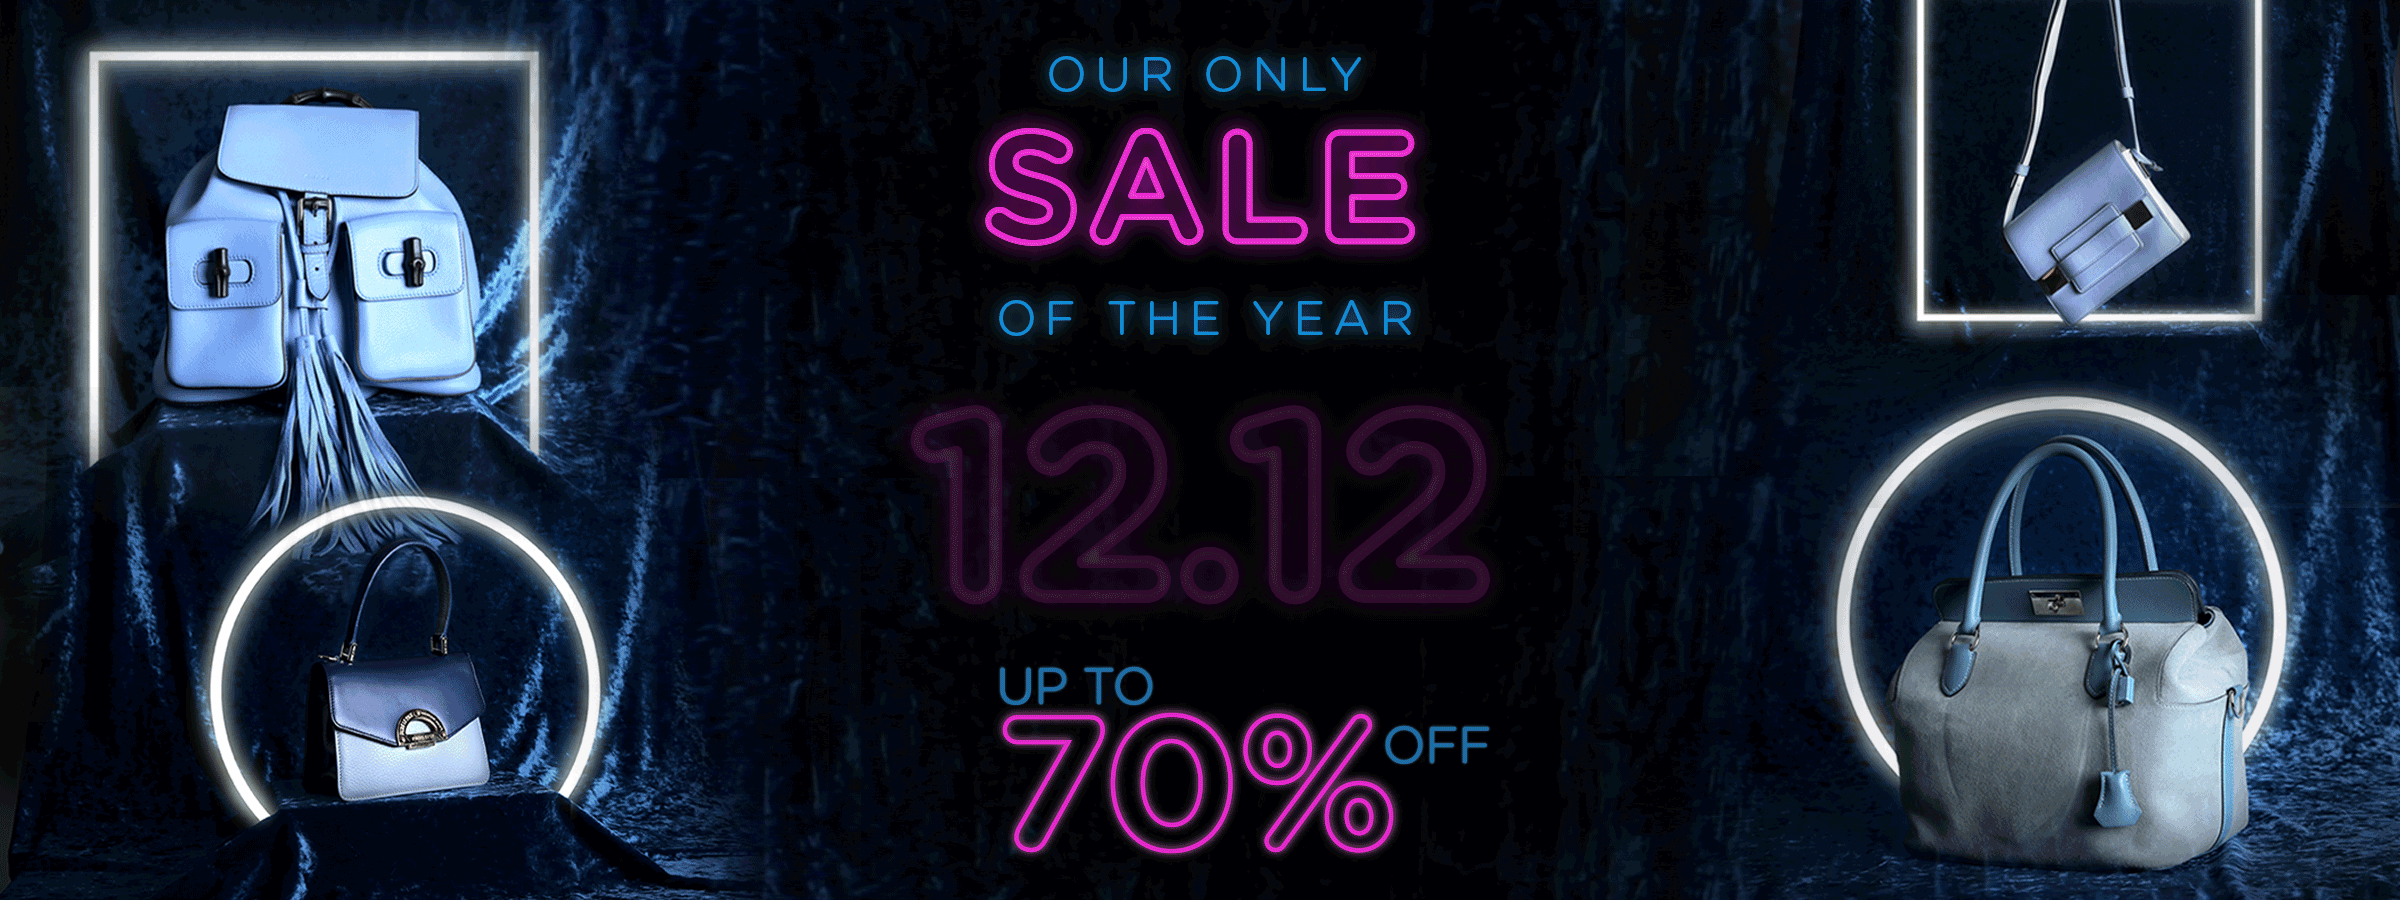 OUR ONLY SALE OF THE YEAR - 12.12